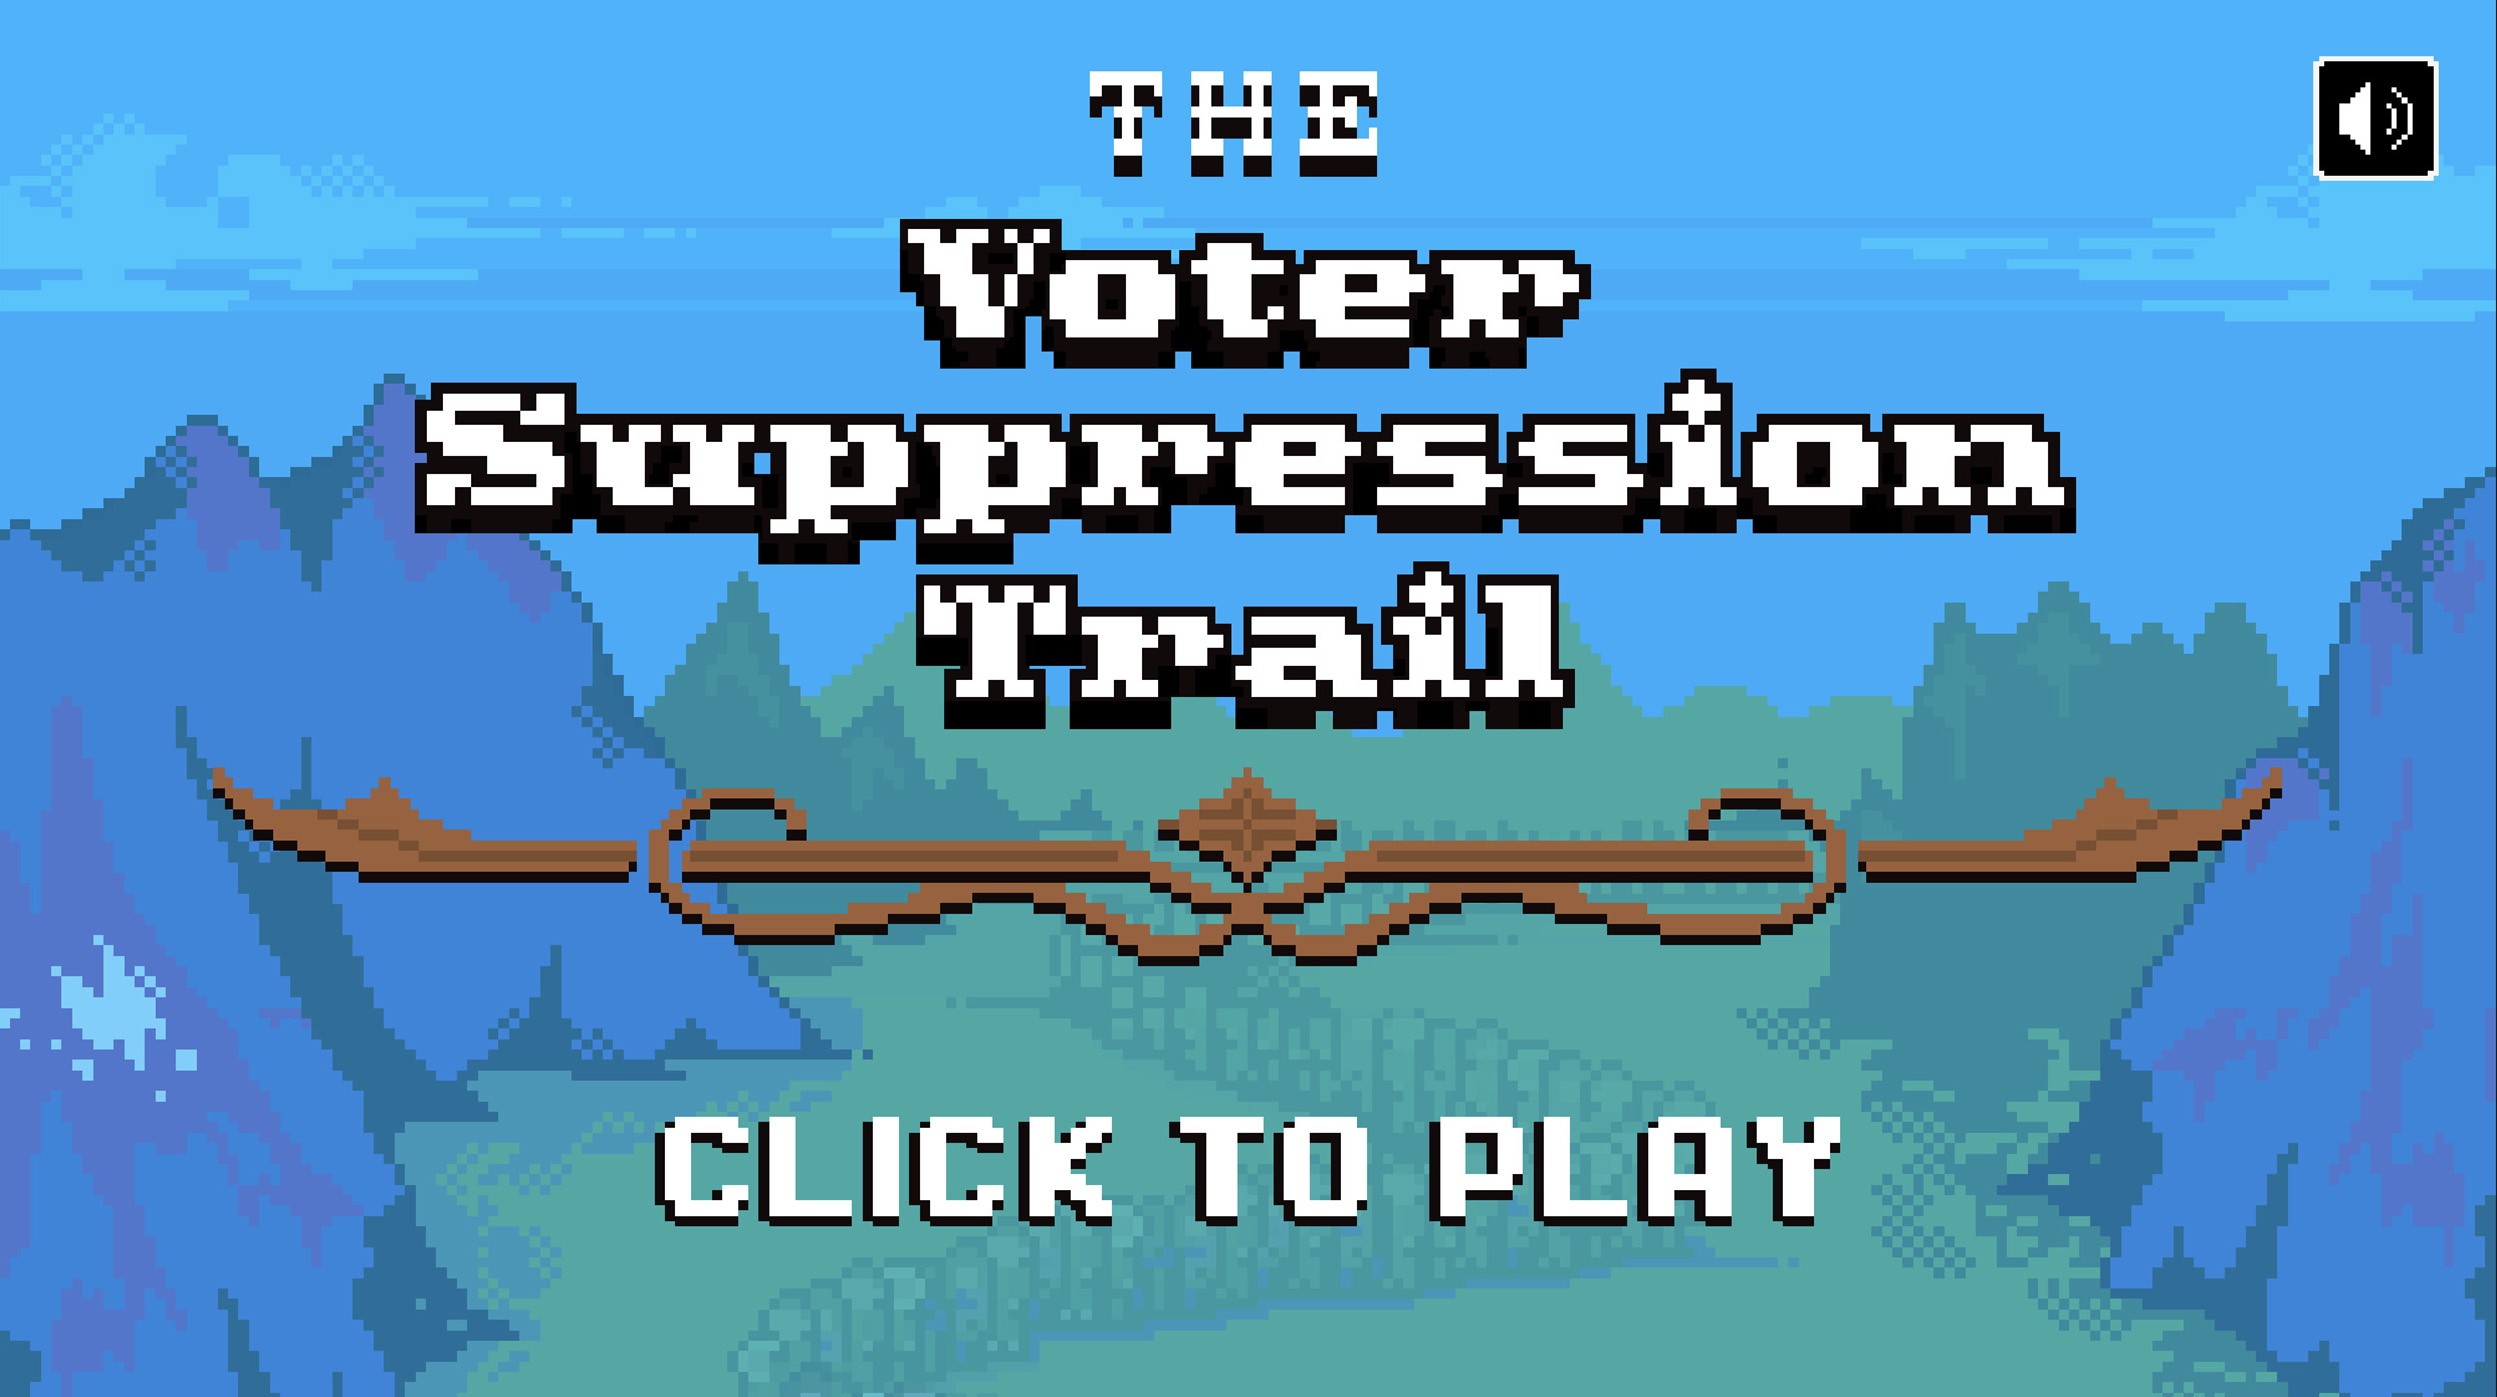 Find out if your vote will survive the adventure of American democracy 